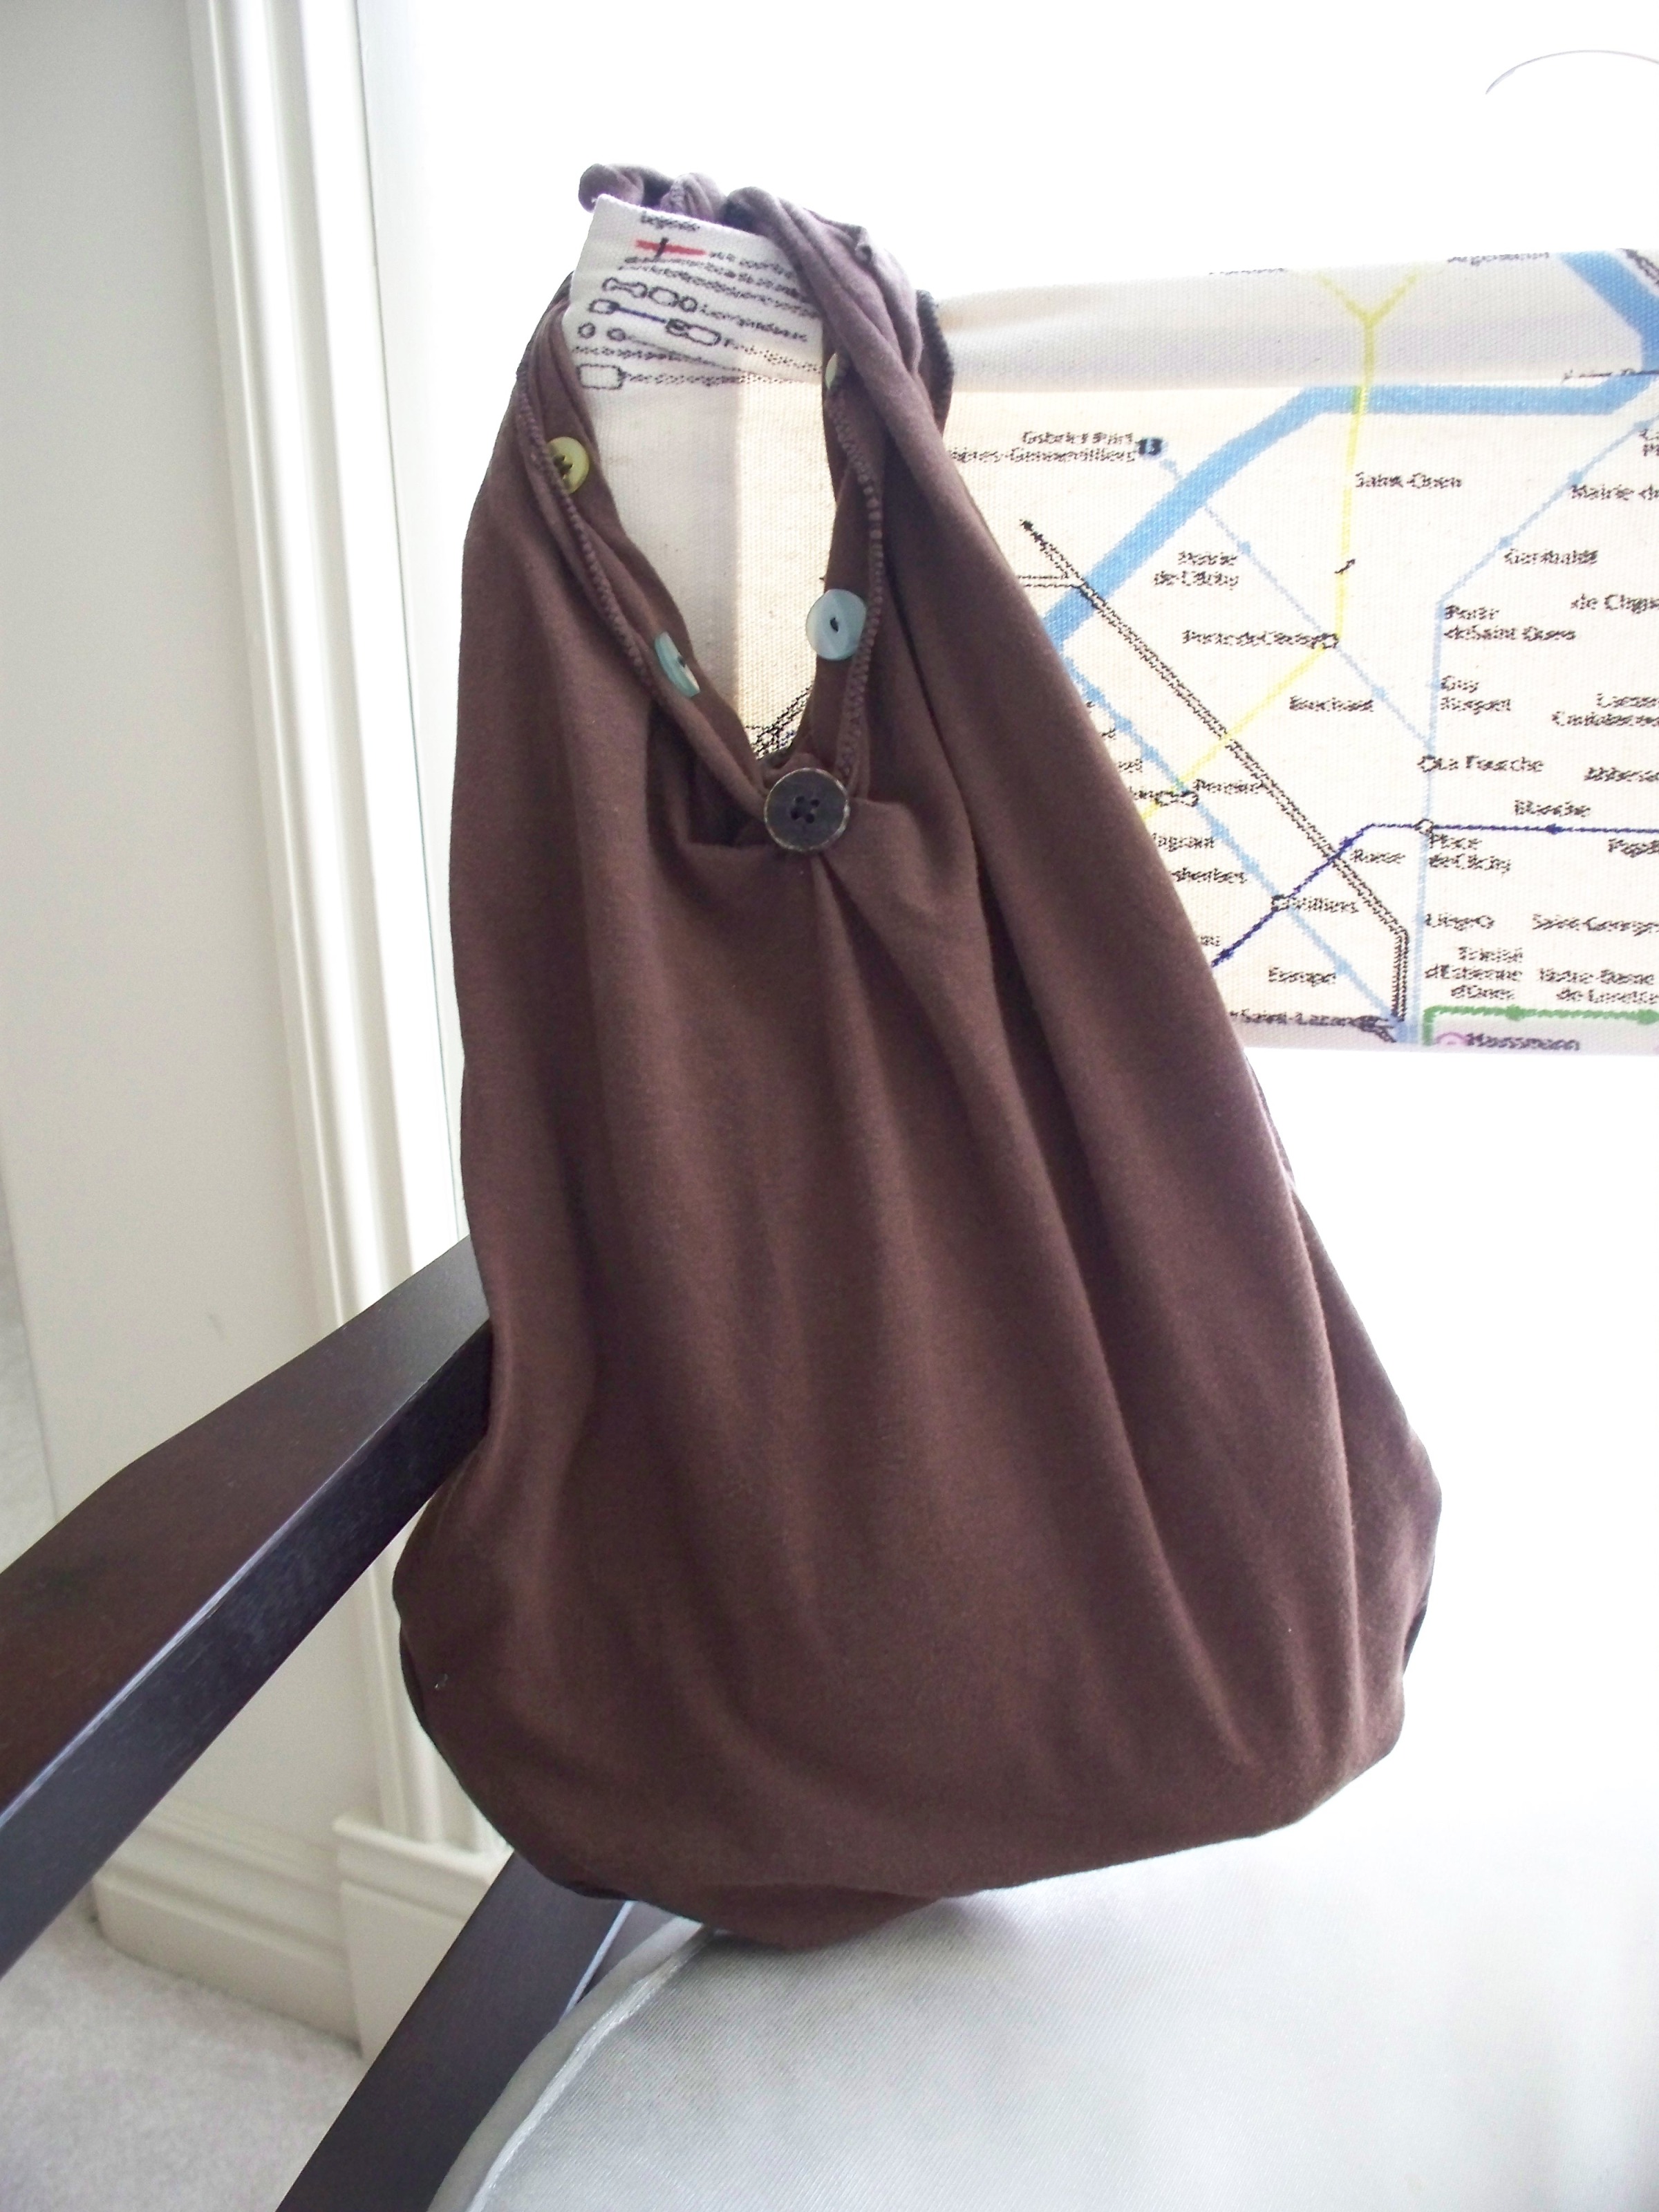 A brown handbag with buttons hangs from a chair arm.